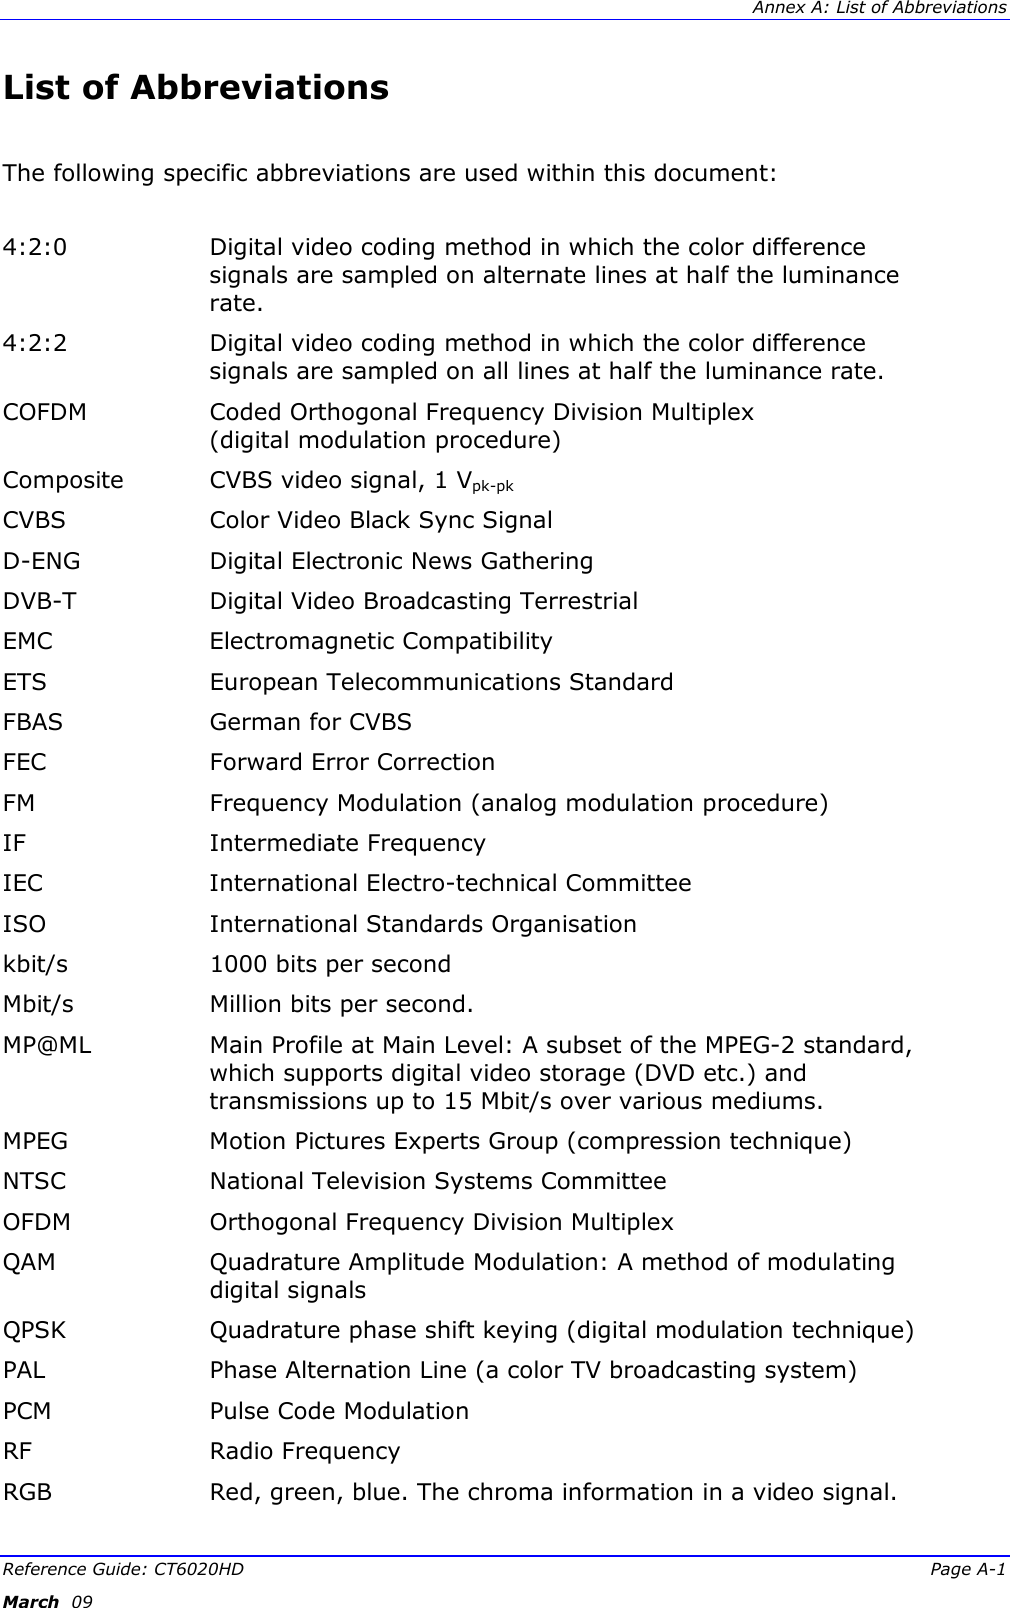  Annex A: List of Abbreviations Reference Guide: CT6020HD  Page A-1 March  09   List of Abbreviations  The following specific abbreviations are used within this document:   4:2:0  Digital video coding method in which the color difference signals are sampled on alternate lines at half the luminance rate. 4:2:2  Digital video coding method in which the color difference signals are sampled on all lines at half the luminance rate. COFDM  Coded Orthogonal Frequency Division Multiplex  (digital modulation procedure) Composite  CVBS video signal, 1 Vpk-pk CVBS  Color Video Black Sync Signal D-ENG  Digital Electronic News Gathering DVB-T  Digital Video Broadcasting Terrestrial EMC   Electromagnetic Compatibility ETS  European Telecommunications Standard FBAS  German for CVBS FEC  Forward Error Correction FM  Frequency Modulation (analog modulation procedure) IF  Intermediate Frequency IEC  International Electro-technical Committee ISO  International Standards Organisation kbit/s   1000 bits per second Mbit/s  Million bits per second. MP@ML  Main Profile at Main Level: A subset of the MPEG-2 standard, which supports digital video storage (DVD etc.) and transmissions up to 15 Mbit/s over various mediums. MPEG  Motion Pictures Experts Group (compression technique)  NTSC  National Television Systems Committee OFDM   Orthogonal Frequency Division Multiplex QAM  Quadrature Amplitude Modulation: A method of modulating digital signals QPSK  Quadrature phase shift keying (digital modulation technique) PAL  Phase Alternation Line (a color TV broadcasting system) PCM  Pulse Code Modulation RF  Radio Frequency RGB  Red, green, blue. The chroma information in a video signal. 